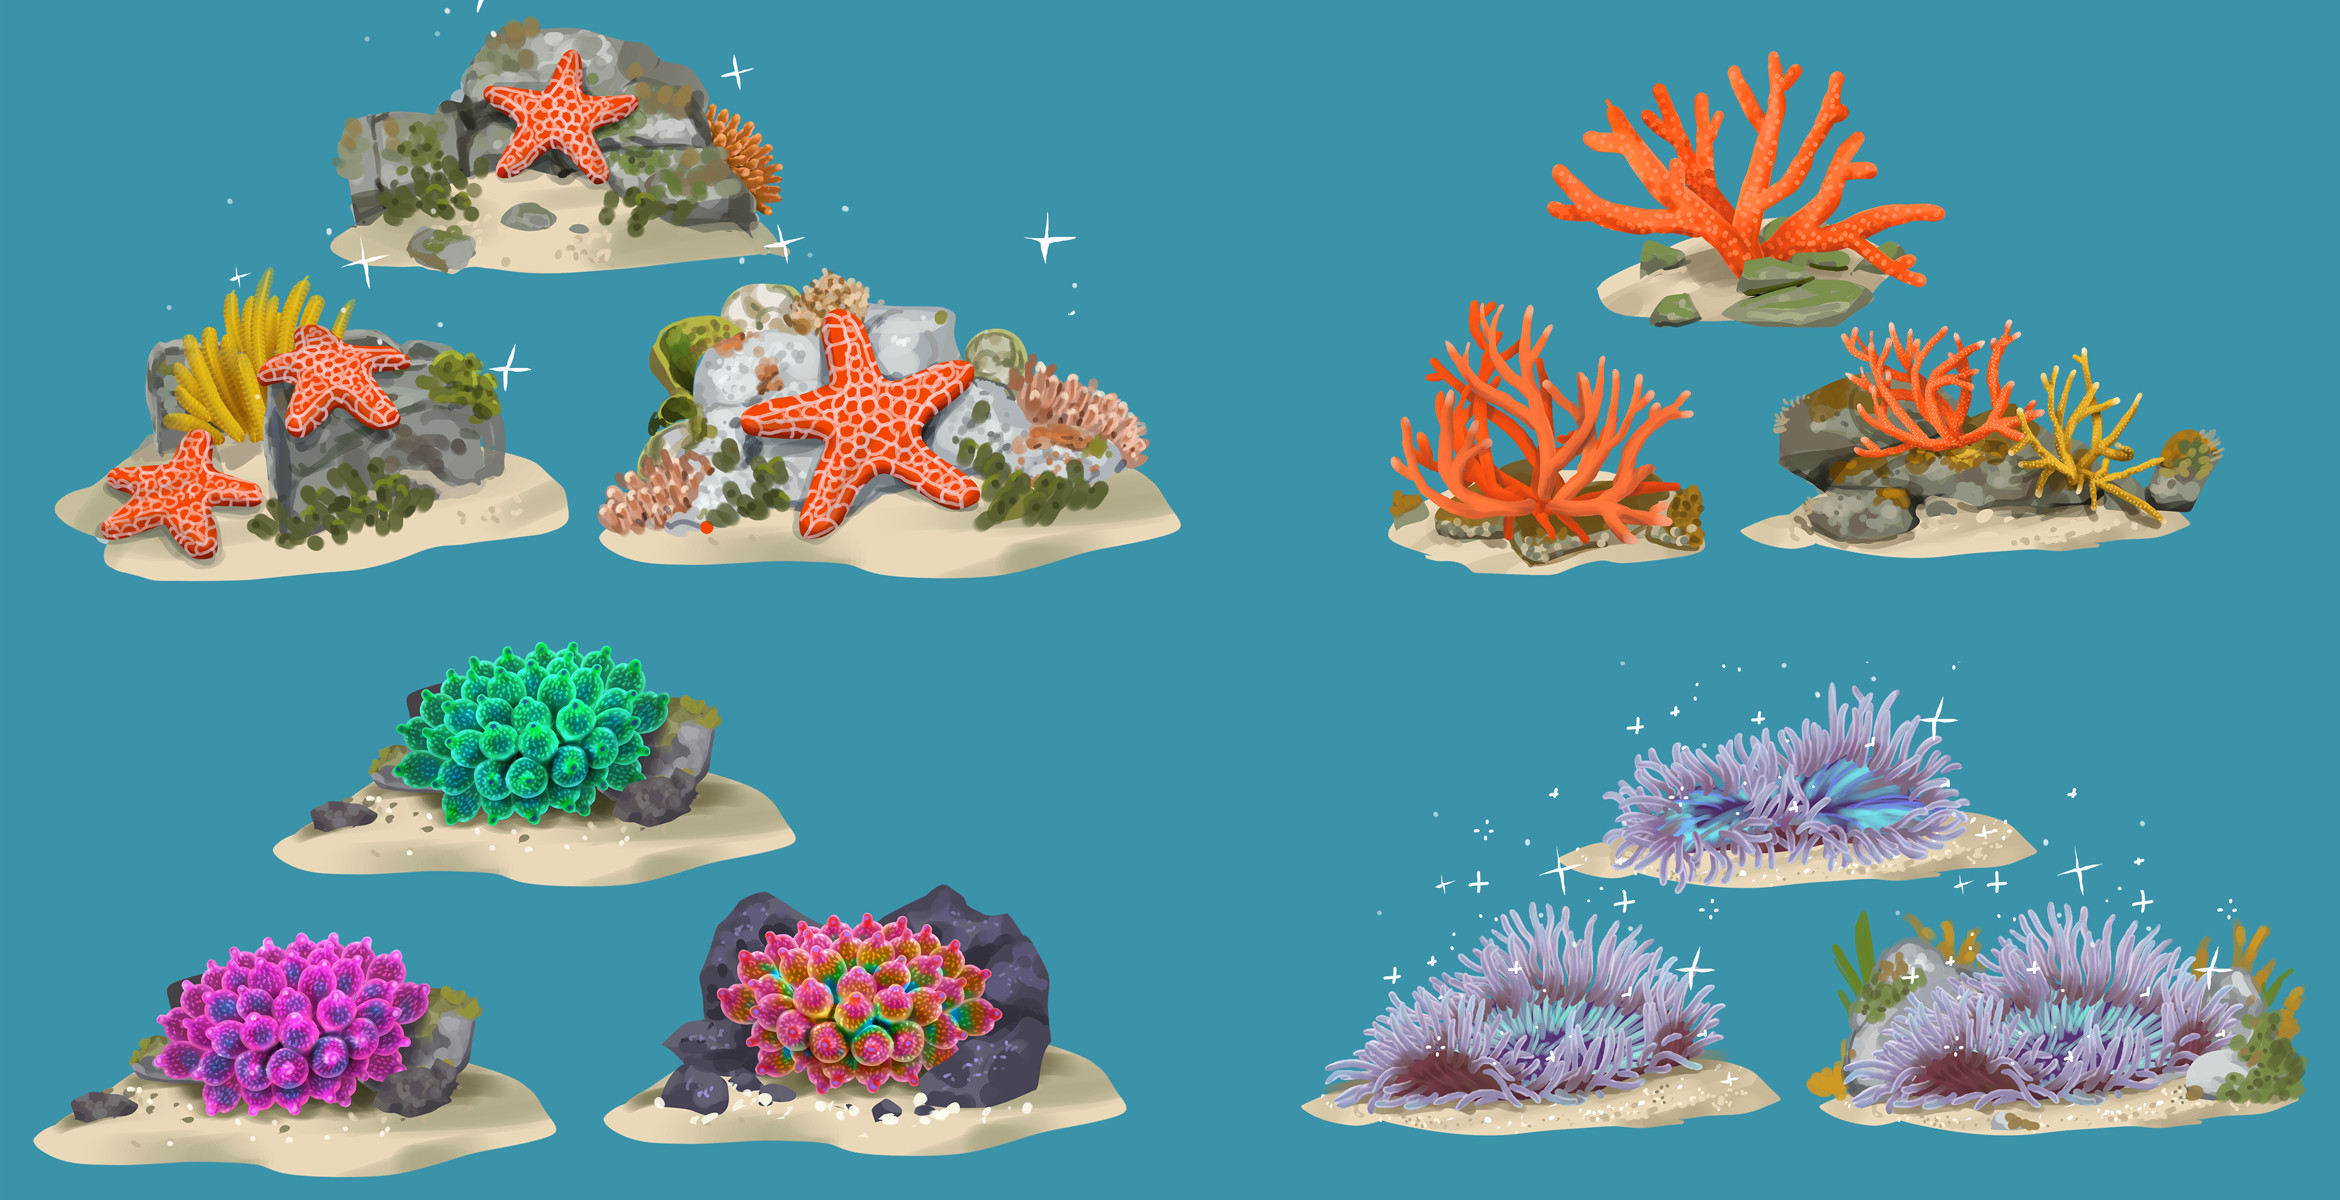 Concepts for plant and animal biome decorations.
Sea Stars has a meta-game of bringing life back to different biomes around the world through a decoration mechanic. However instead of using furniture items the player decorates using plant and animal life.